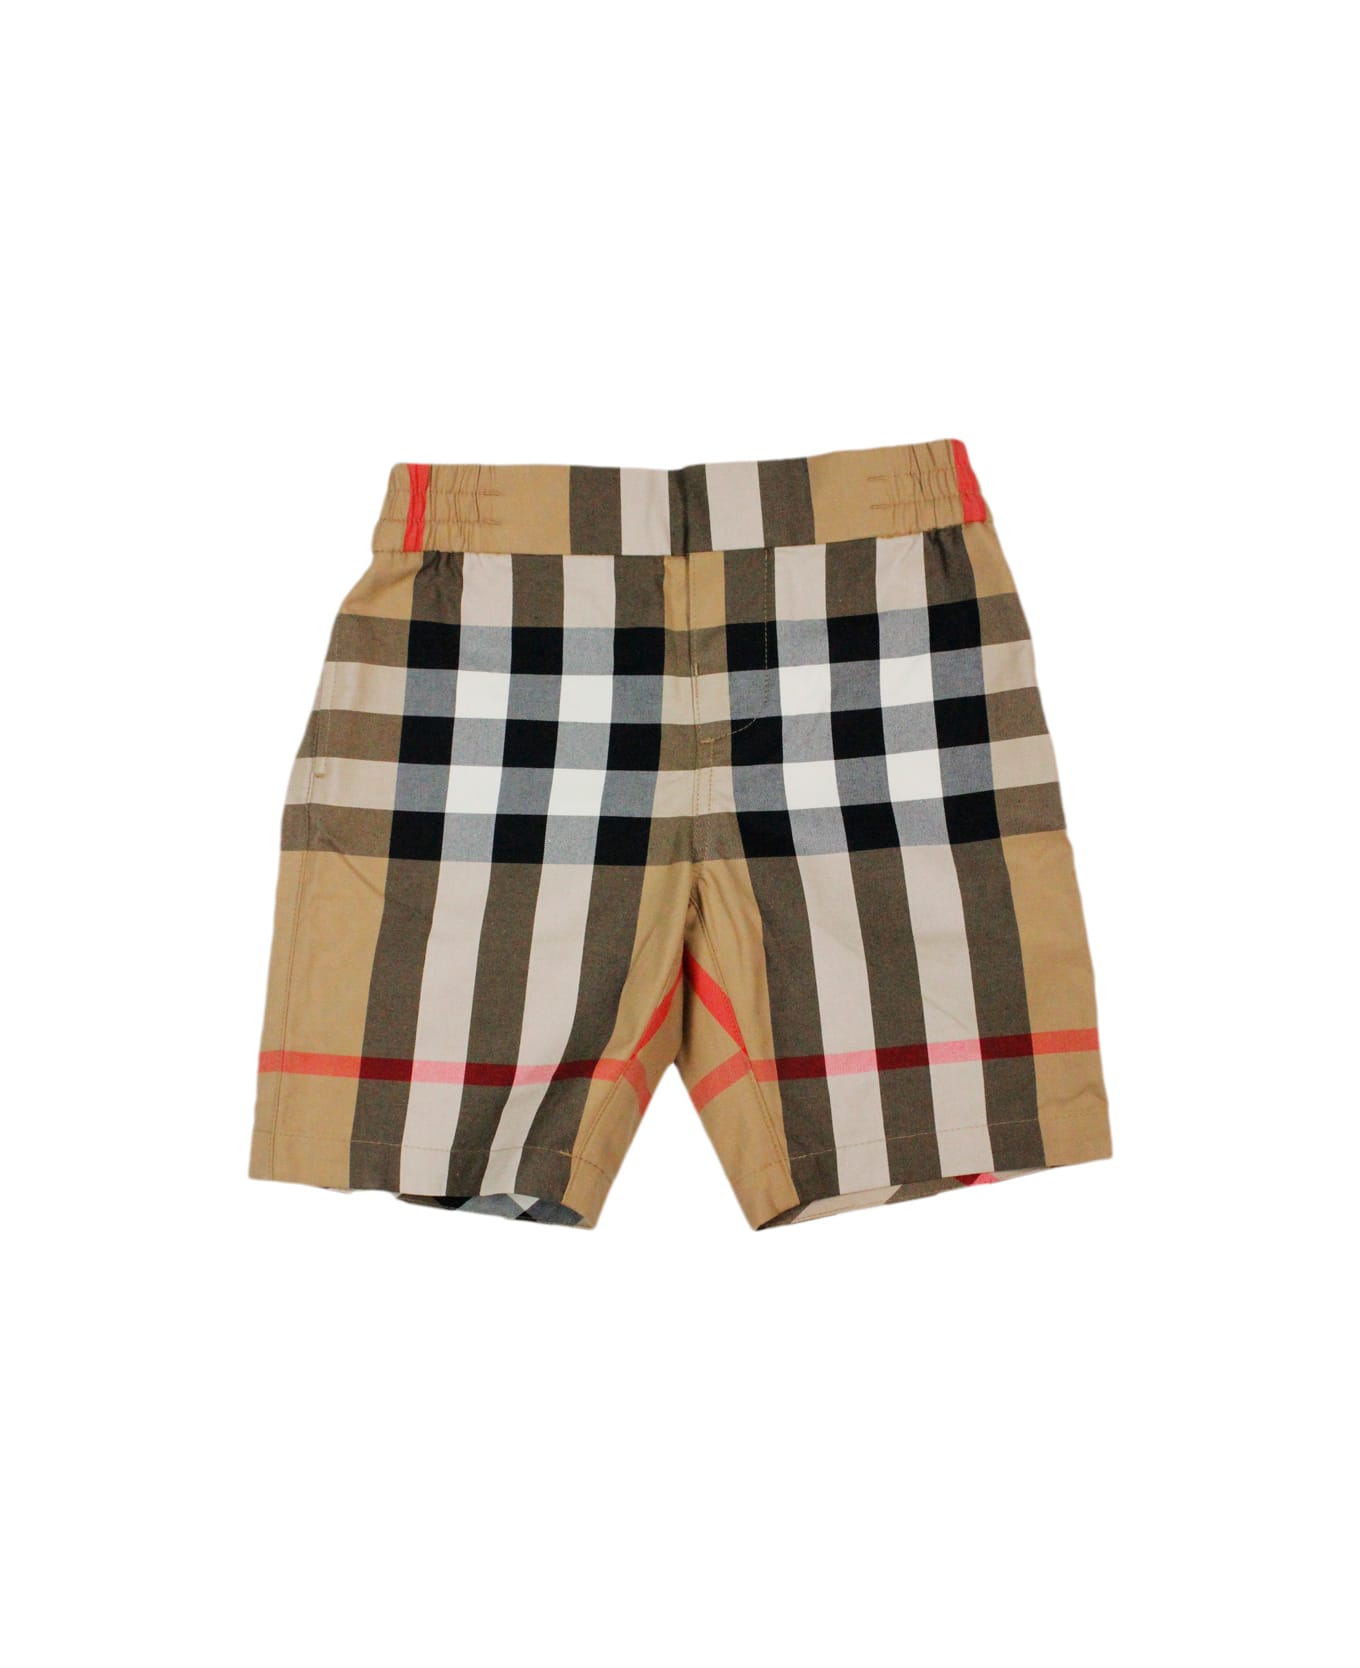 Burberry Cotton Jersey Shorts With Elasticated Waist And Front Welt Pockets And Classic Check Back Pockets - Check Beige